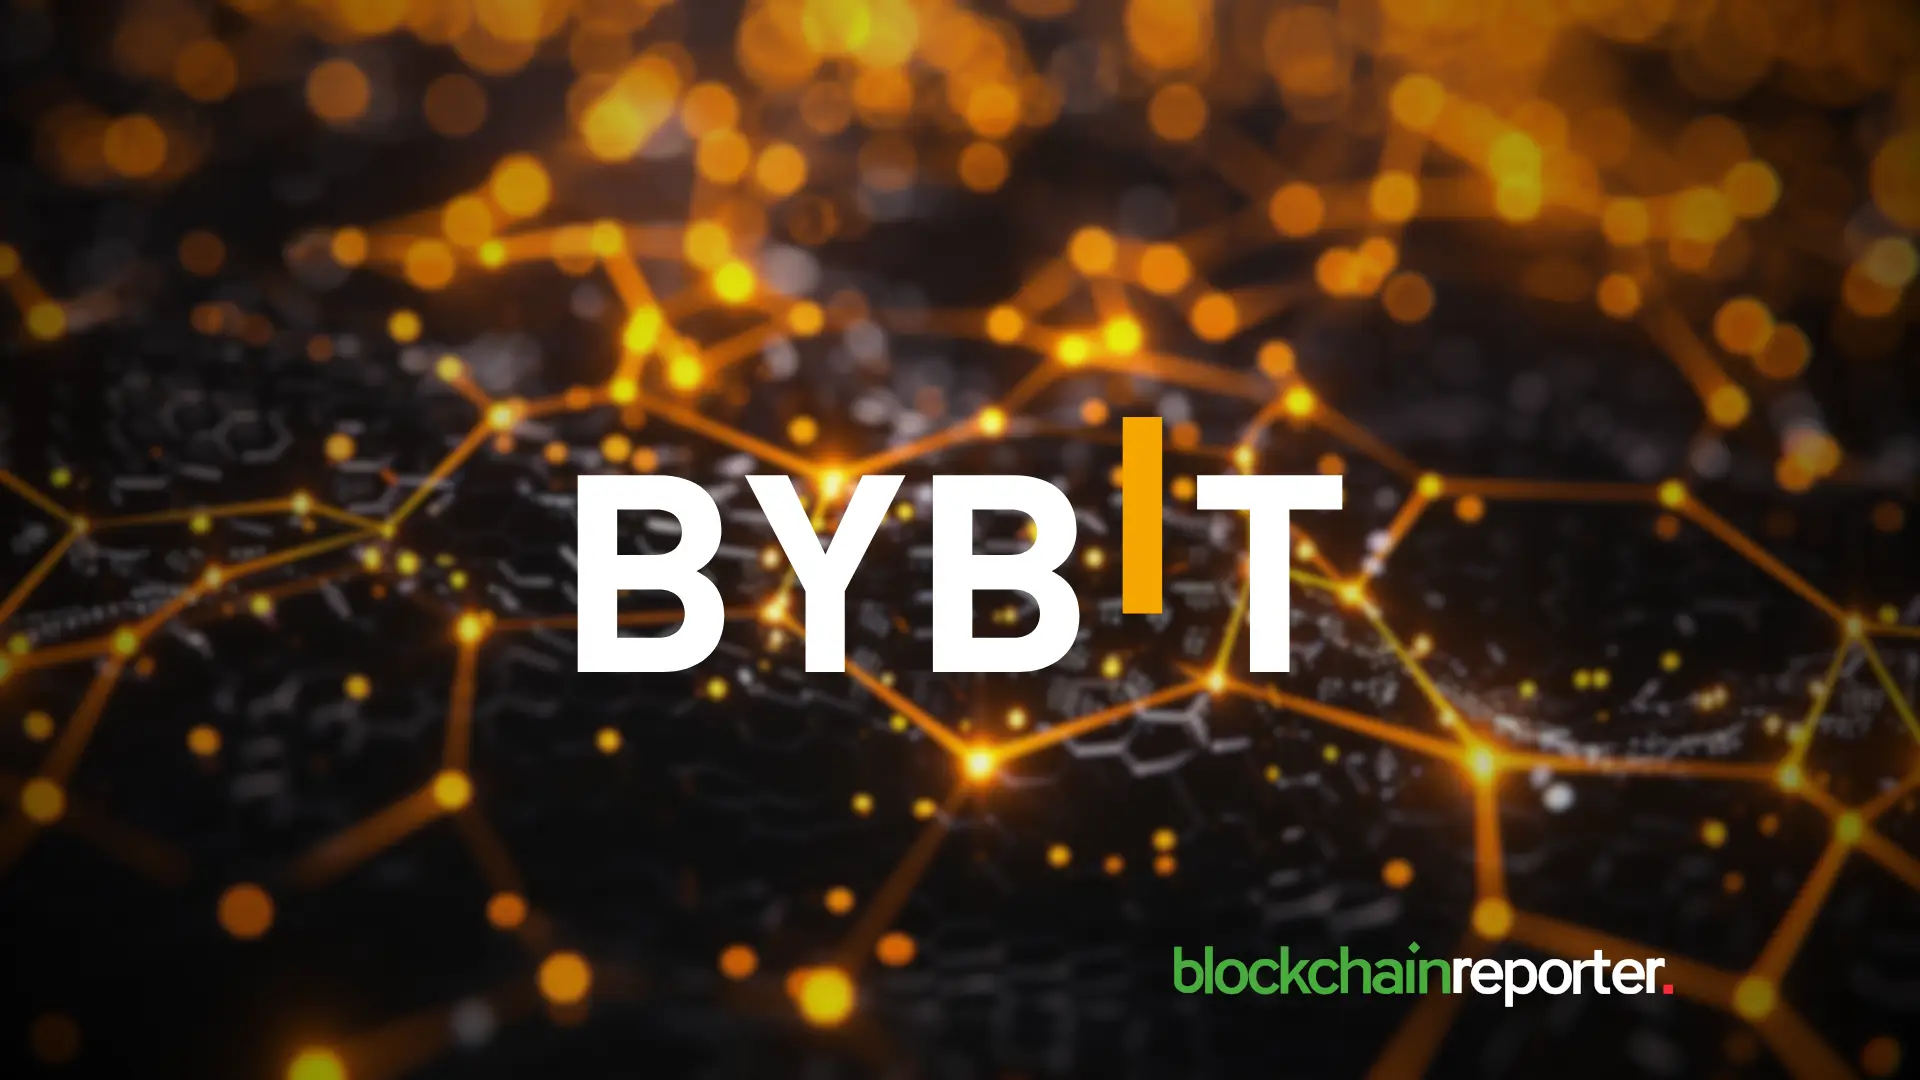 Bybit Connects Market Makers with Projects Through New Liquidity Program